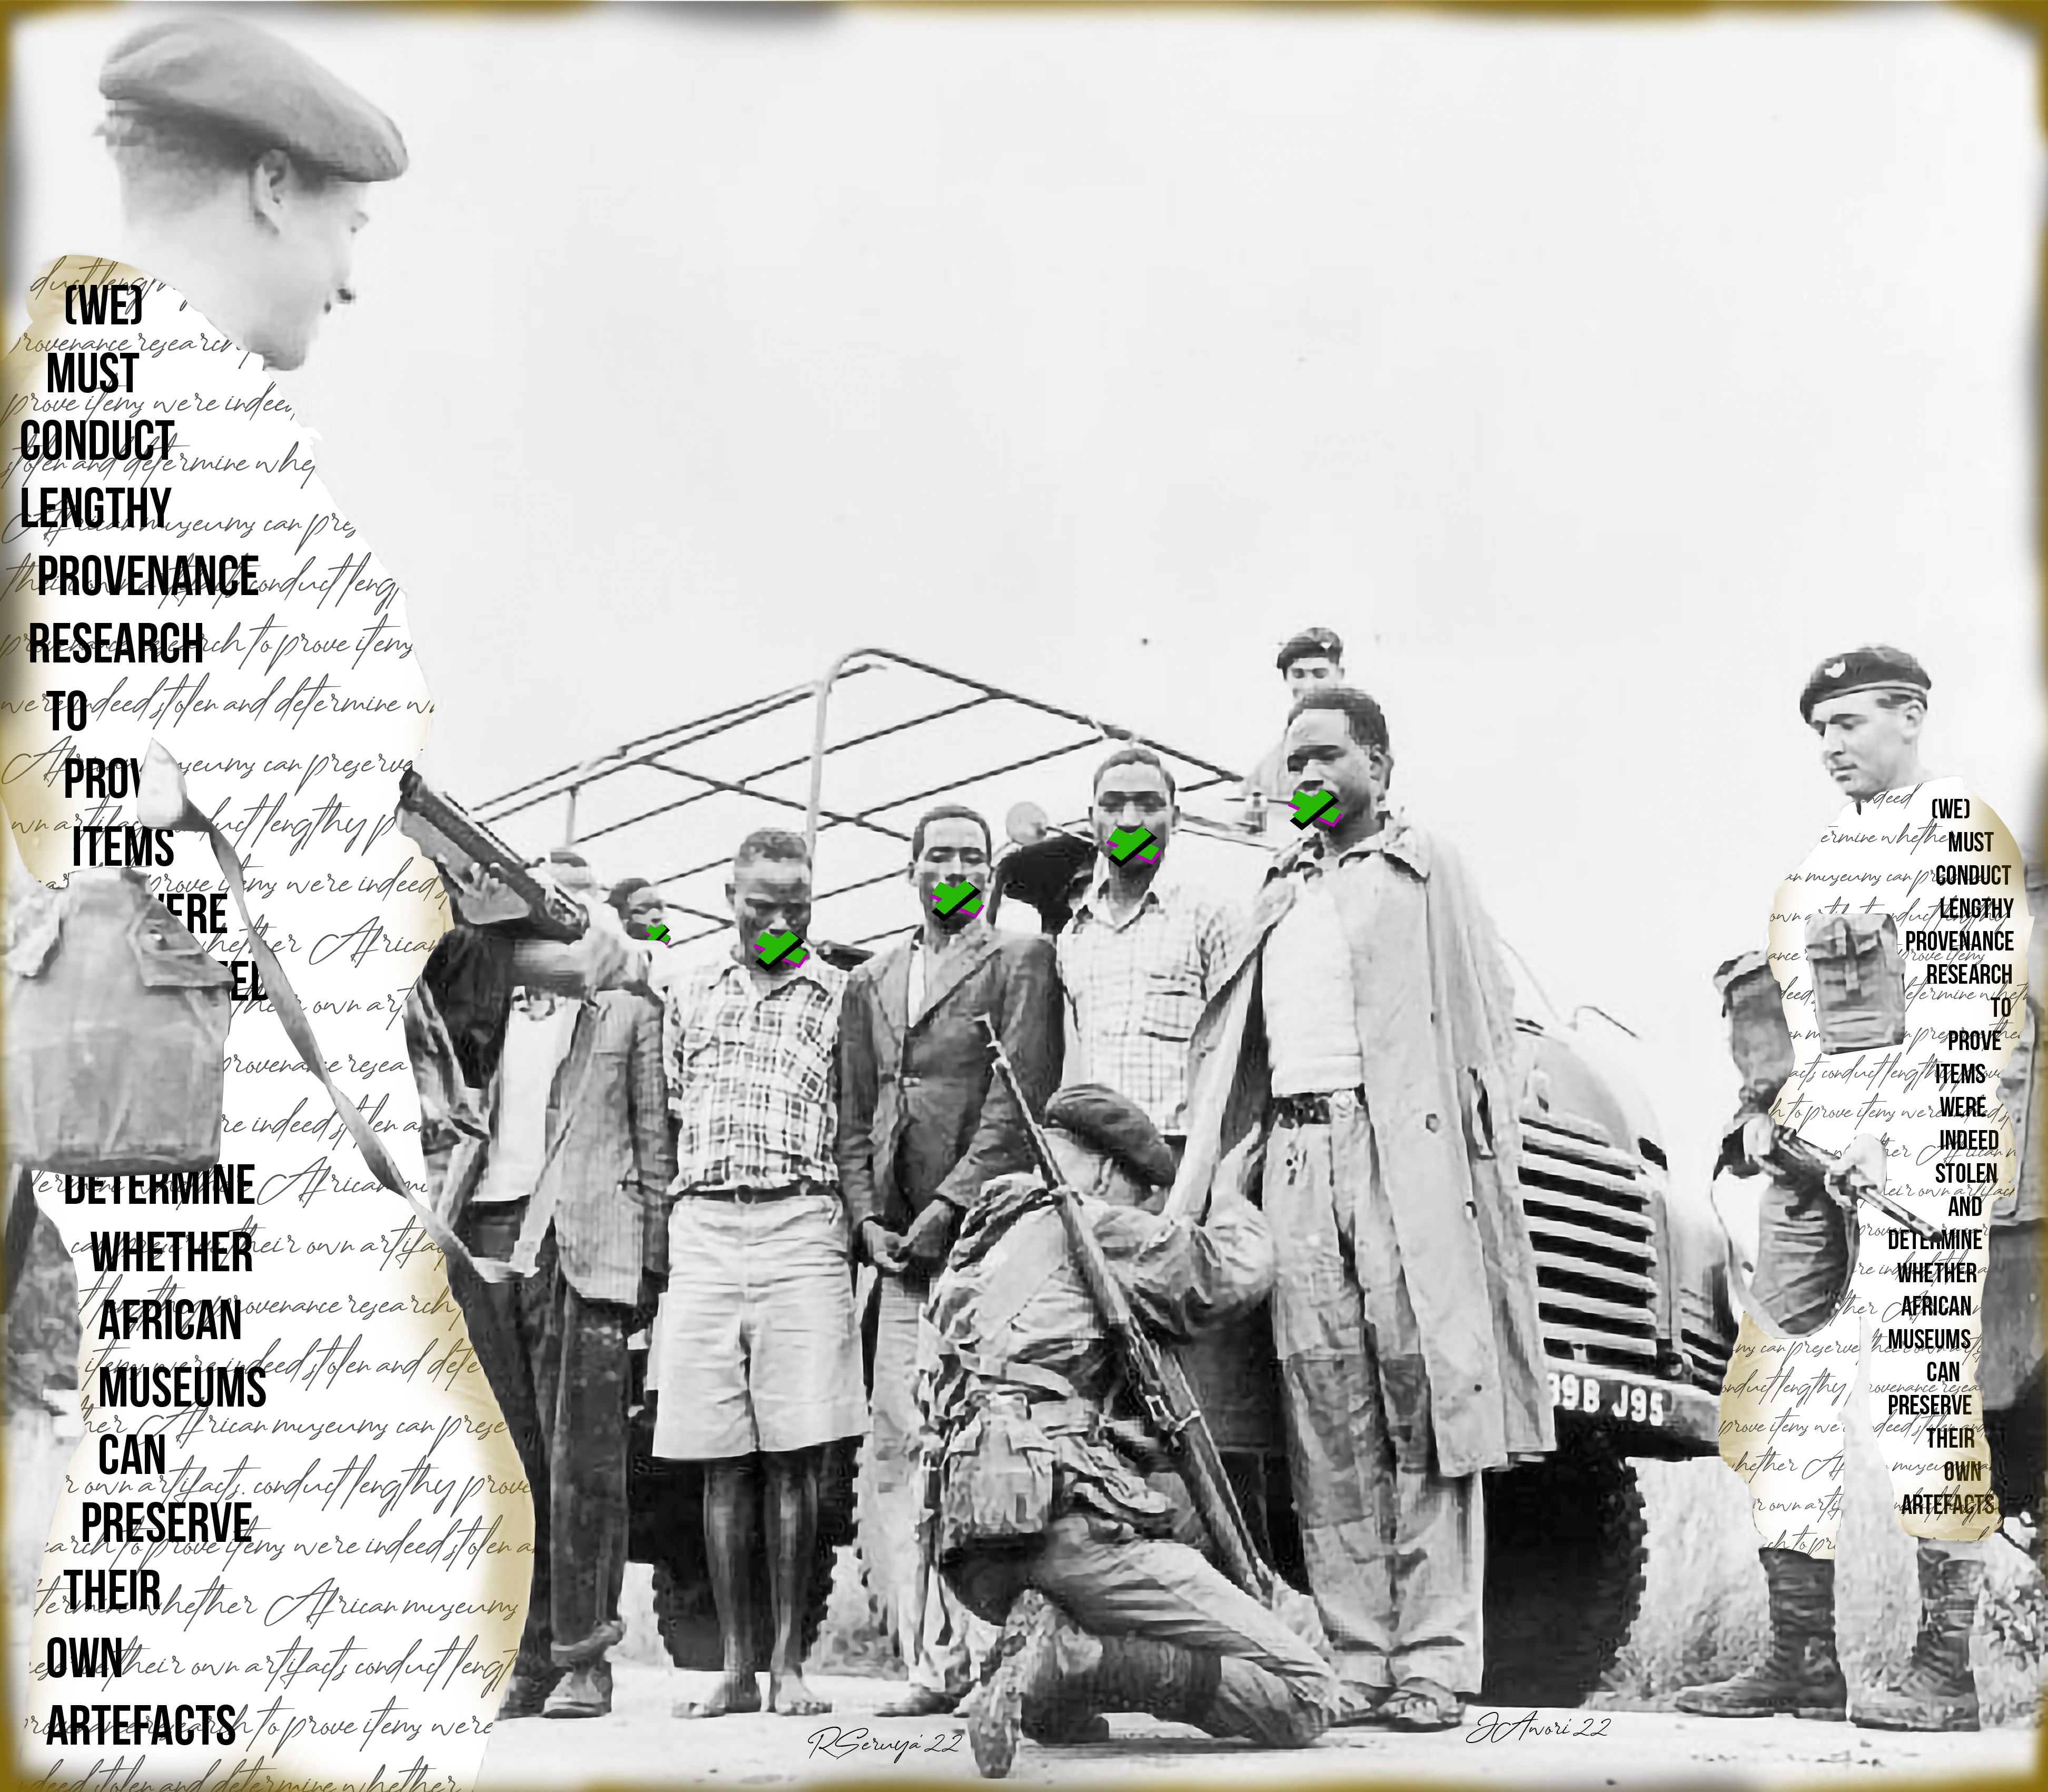 One-way conversation 7 (Image used: British soldiers inspecting the MauMau in Kenya)  (Text used: extract from the article "Africa’s Stolen Art Debate Is Frozen in Time"  by Foreign Policy, stating Western institutions’ rebuttal against timely restitution.)